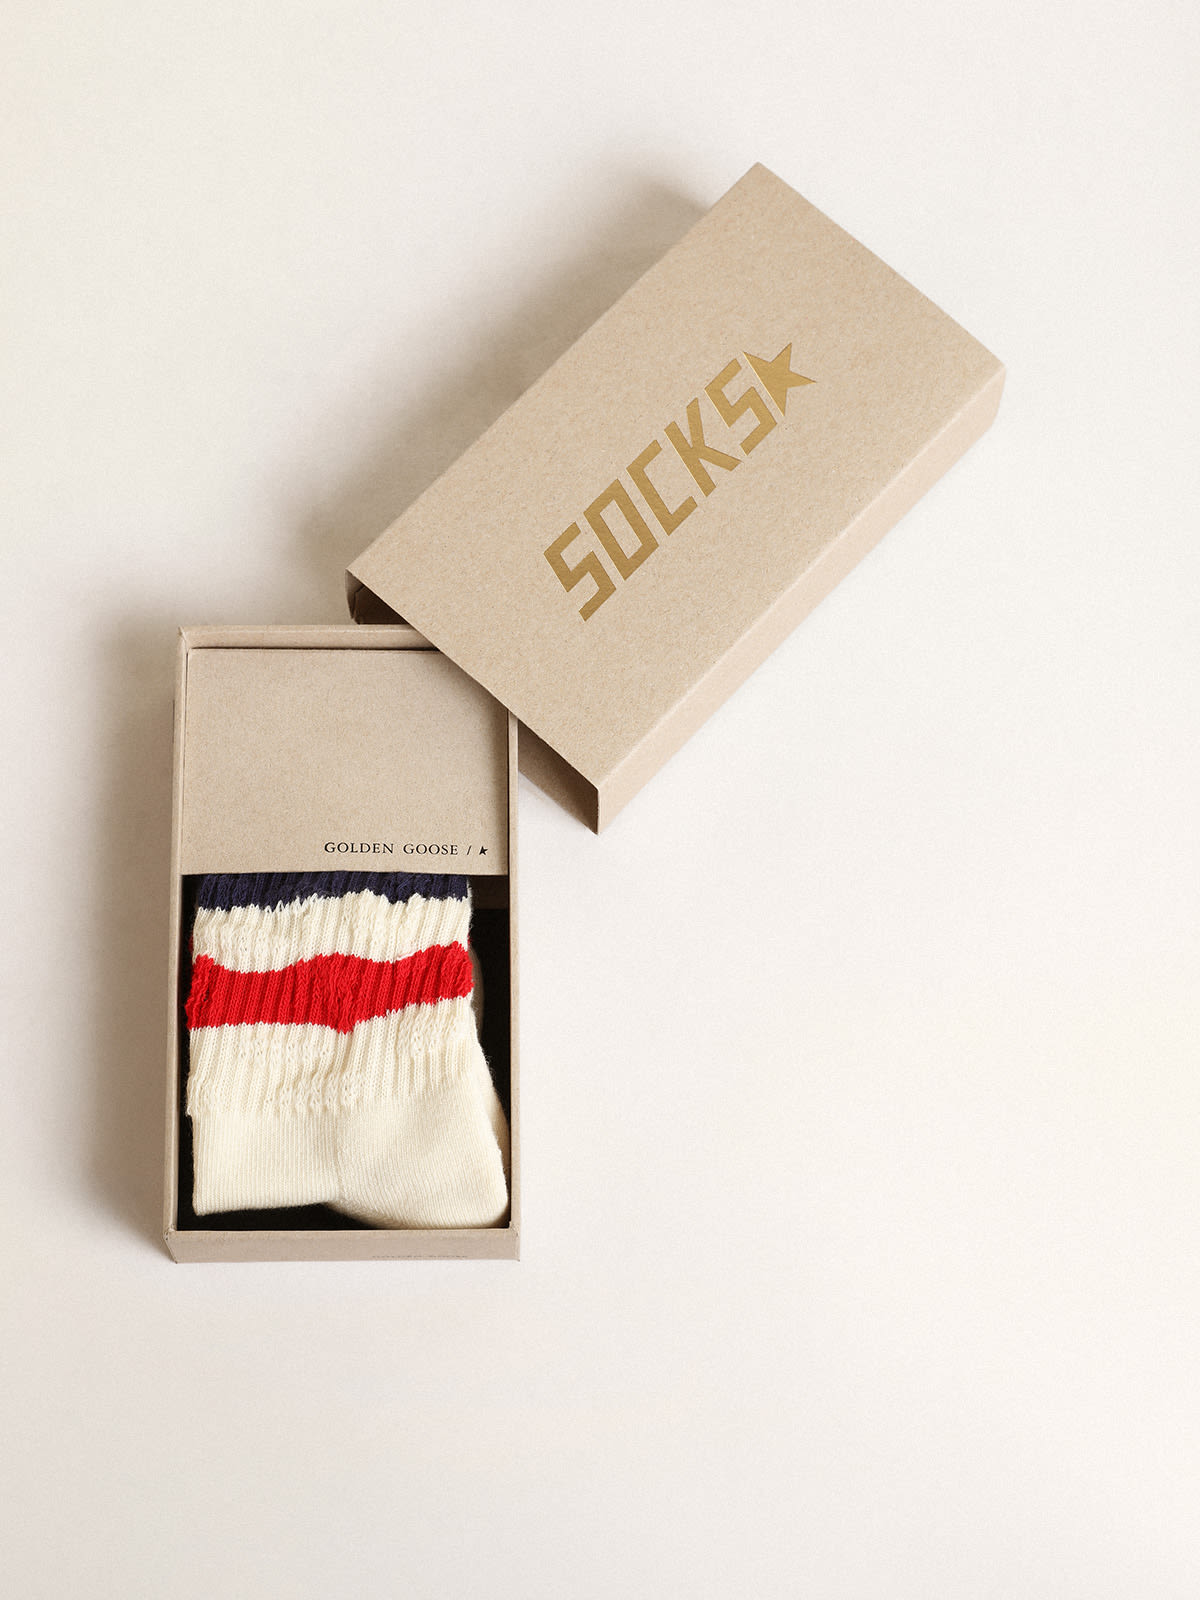 Golden Goose - Socks in distressed-finish white cotton with red and navy stripes in 